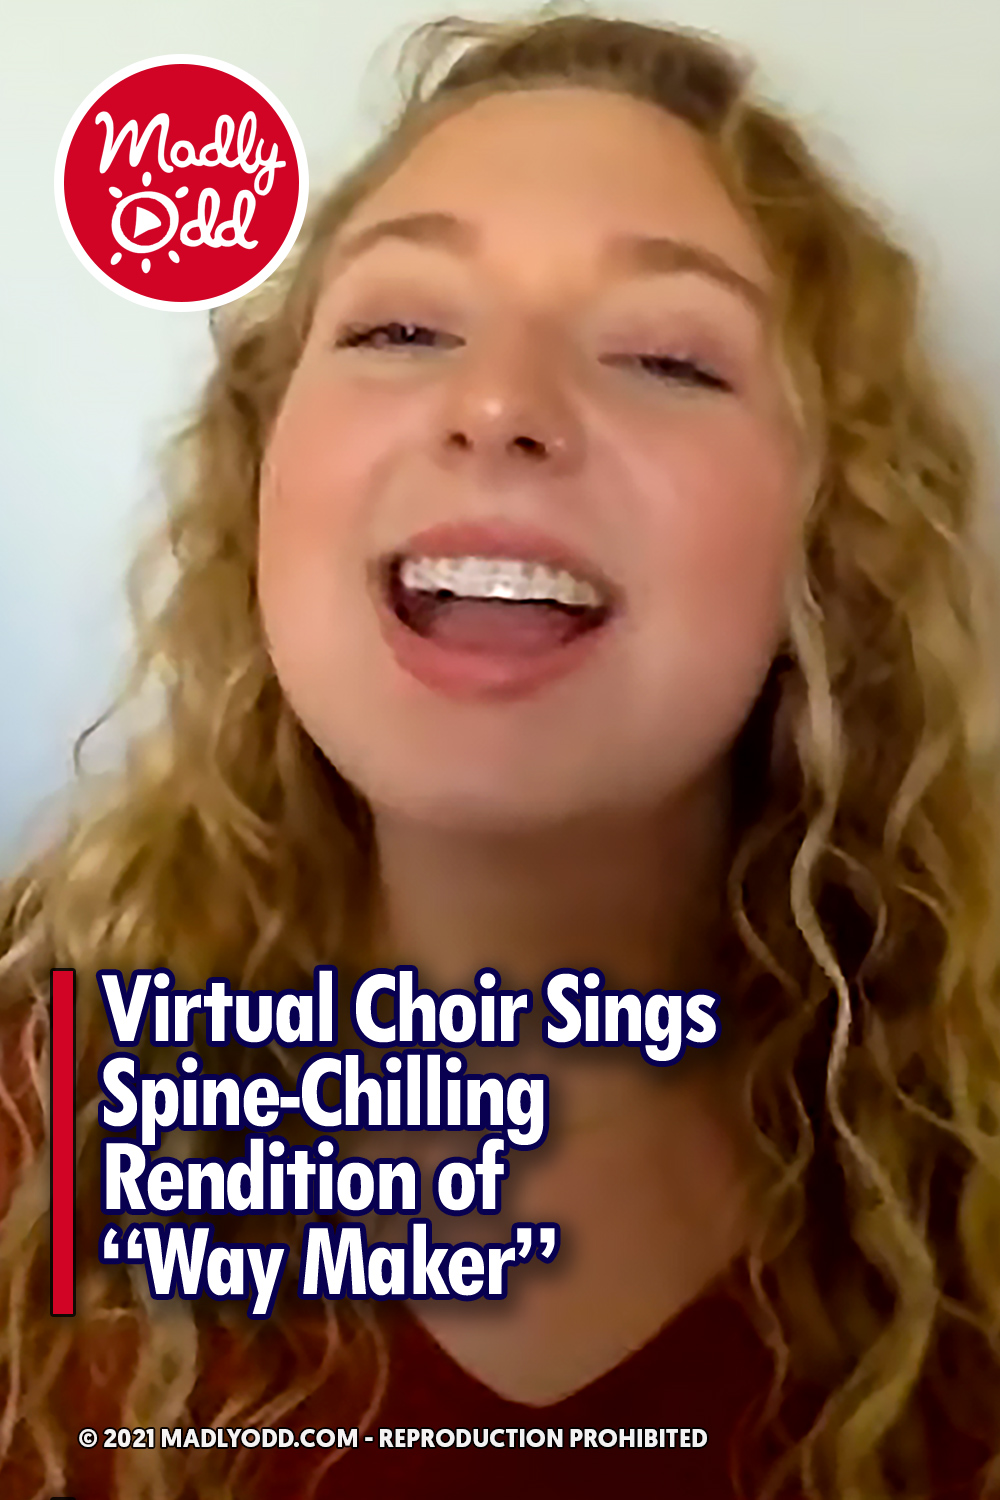 Virtual Choir Sings Spine-Chilling Rendition of “Way Maker”